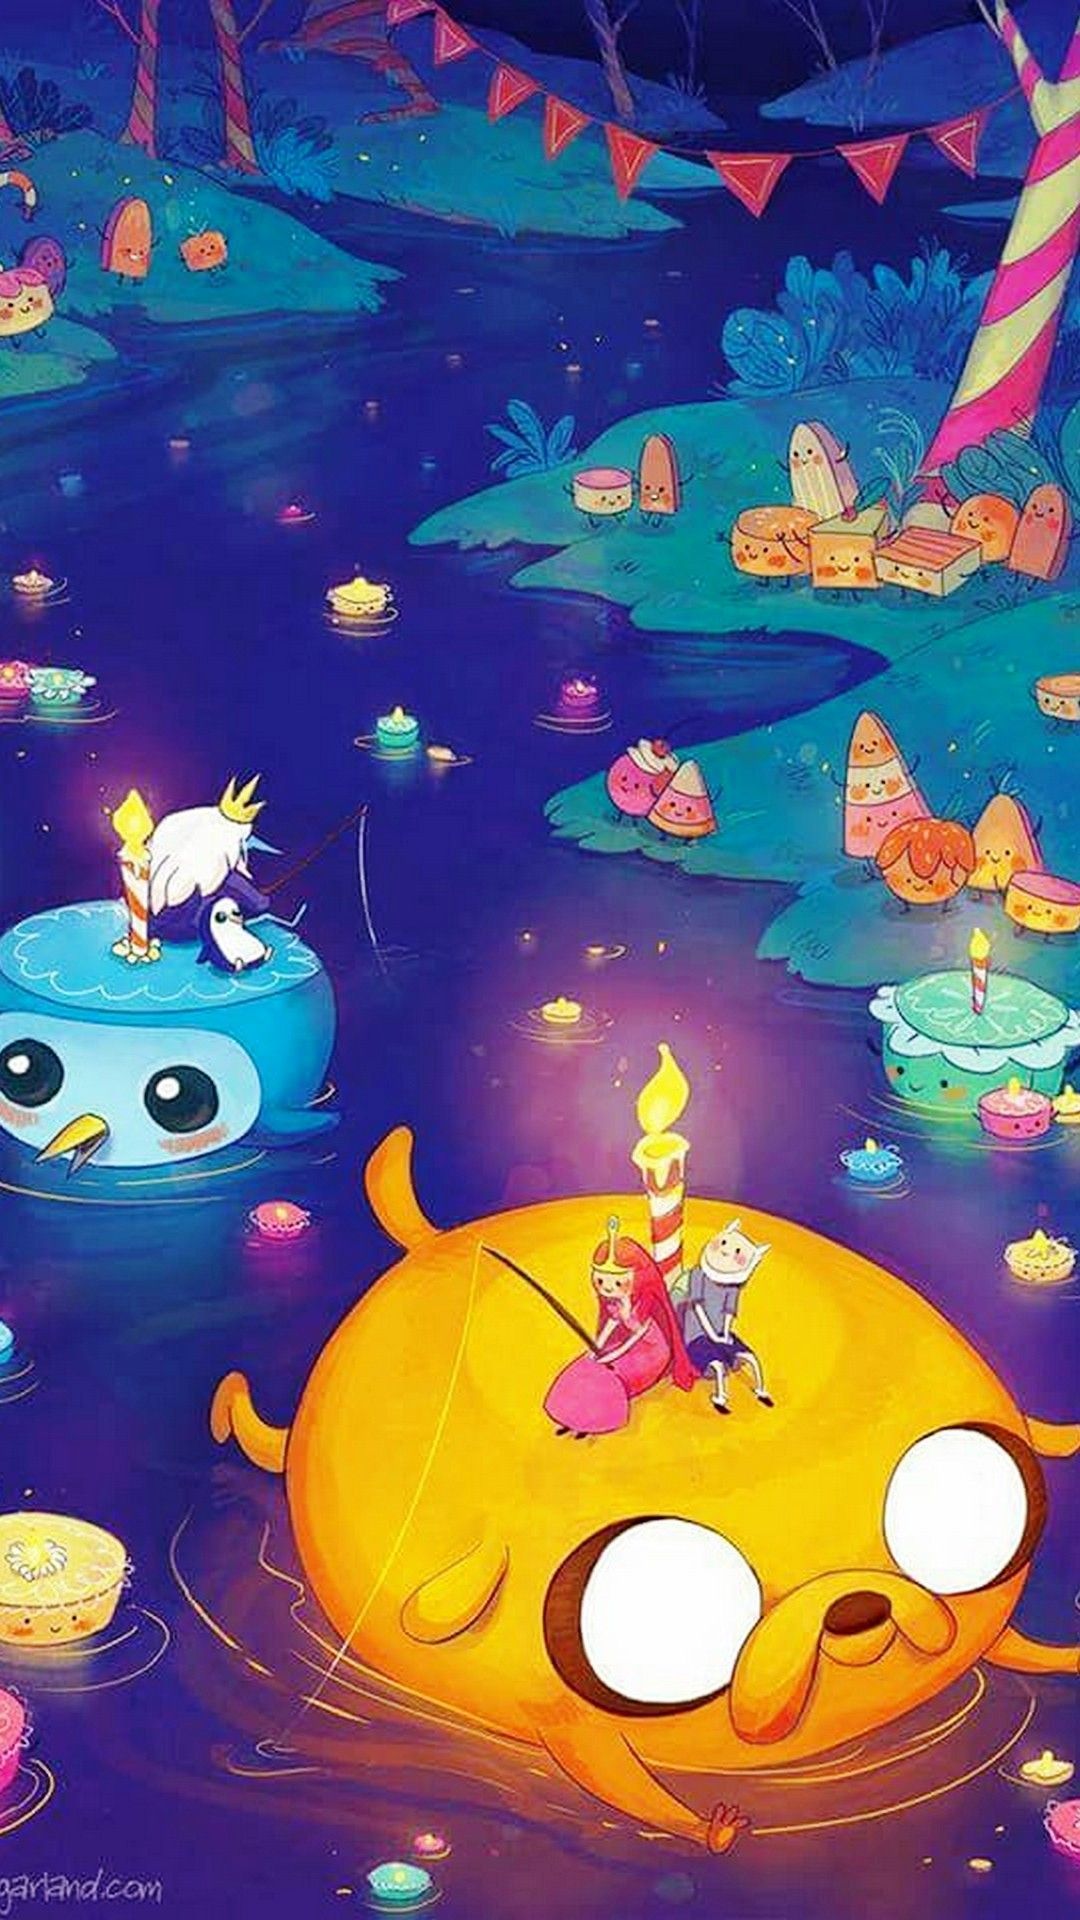 Adventure Time Wallpaper for Phones Phone Wallpaper. Adventure time wallpaper, Adventure time, Adventure time parties